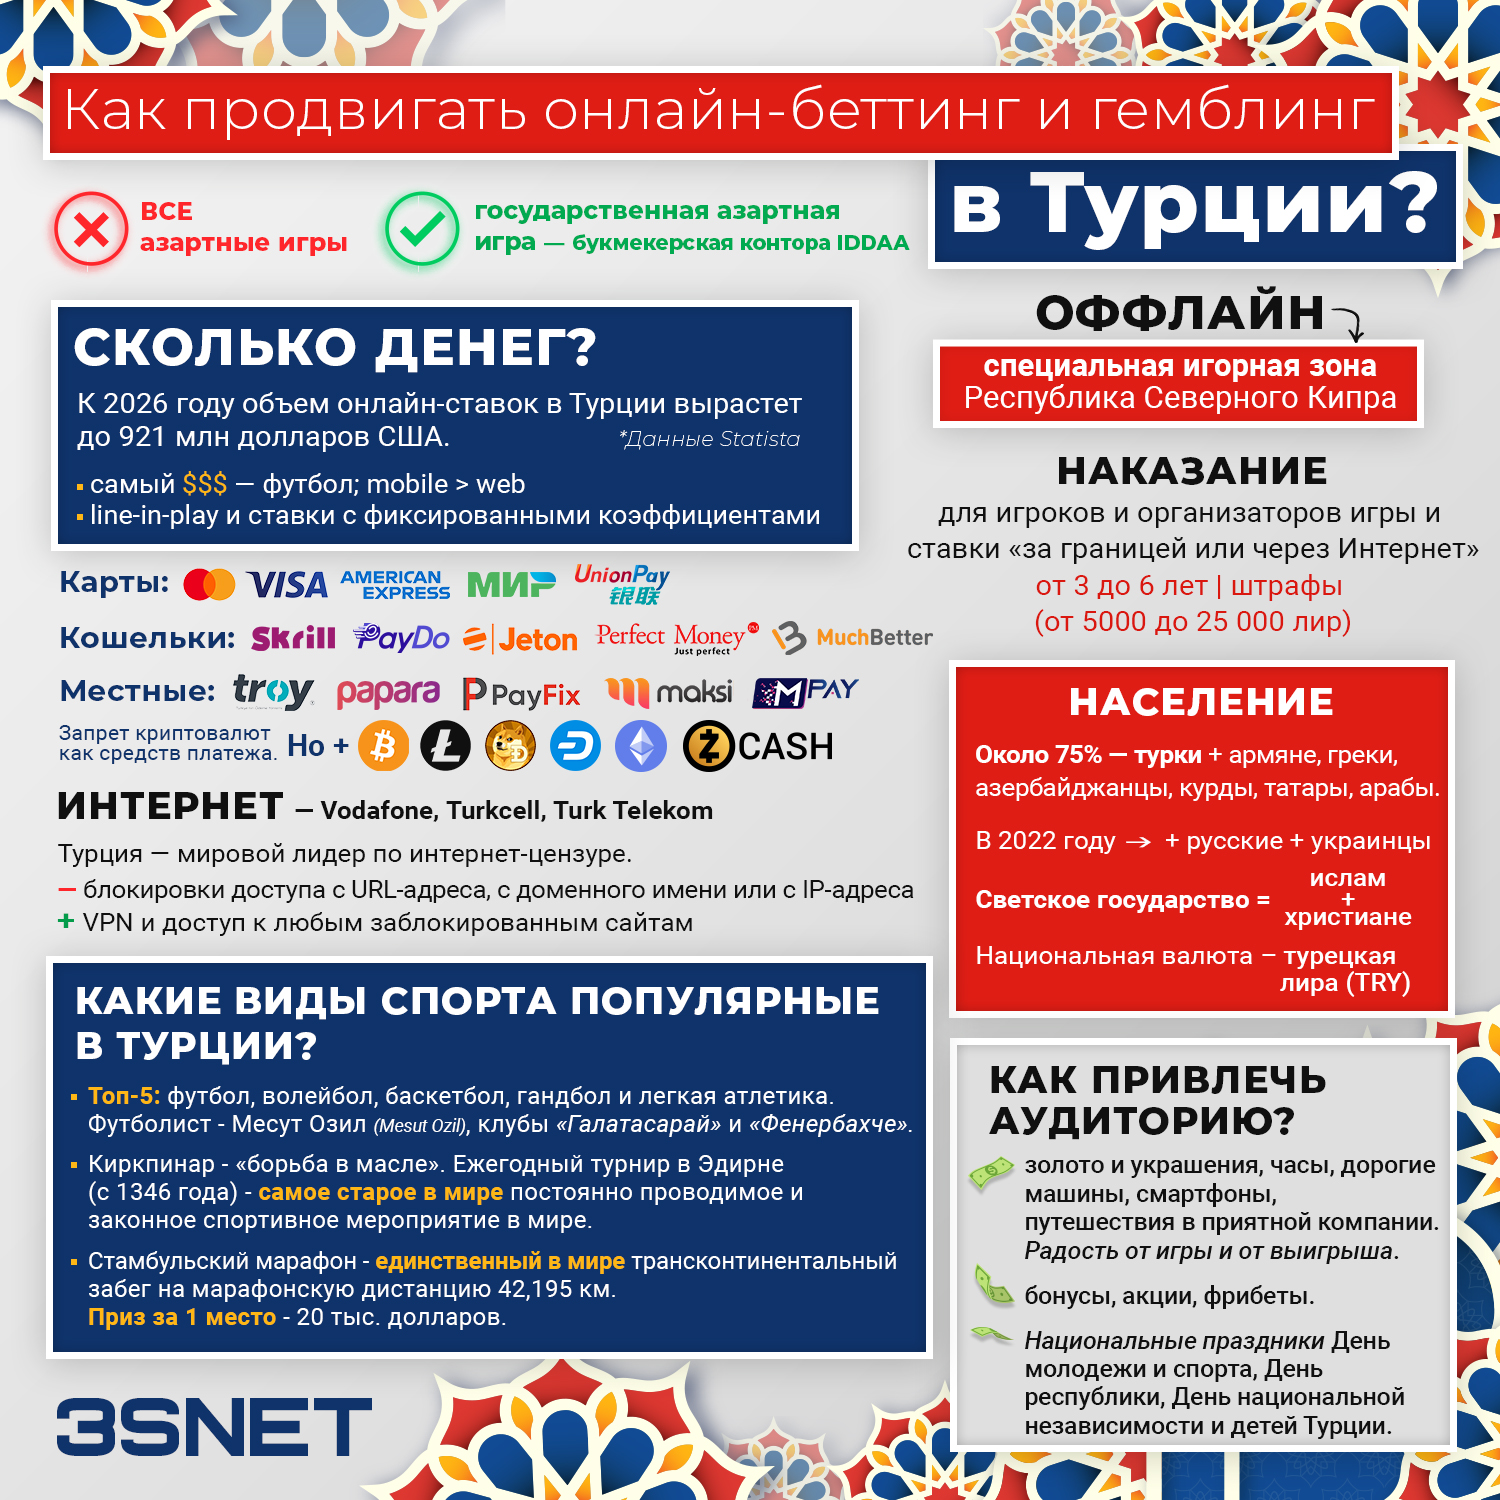 Turkey How to promote online gambling and betting 3snet info